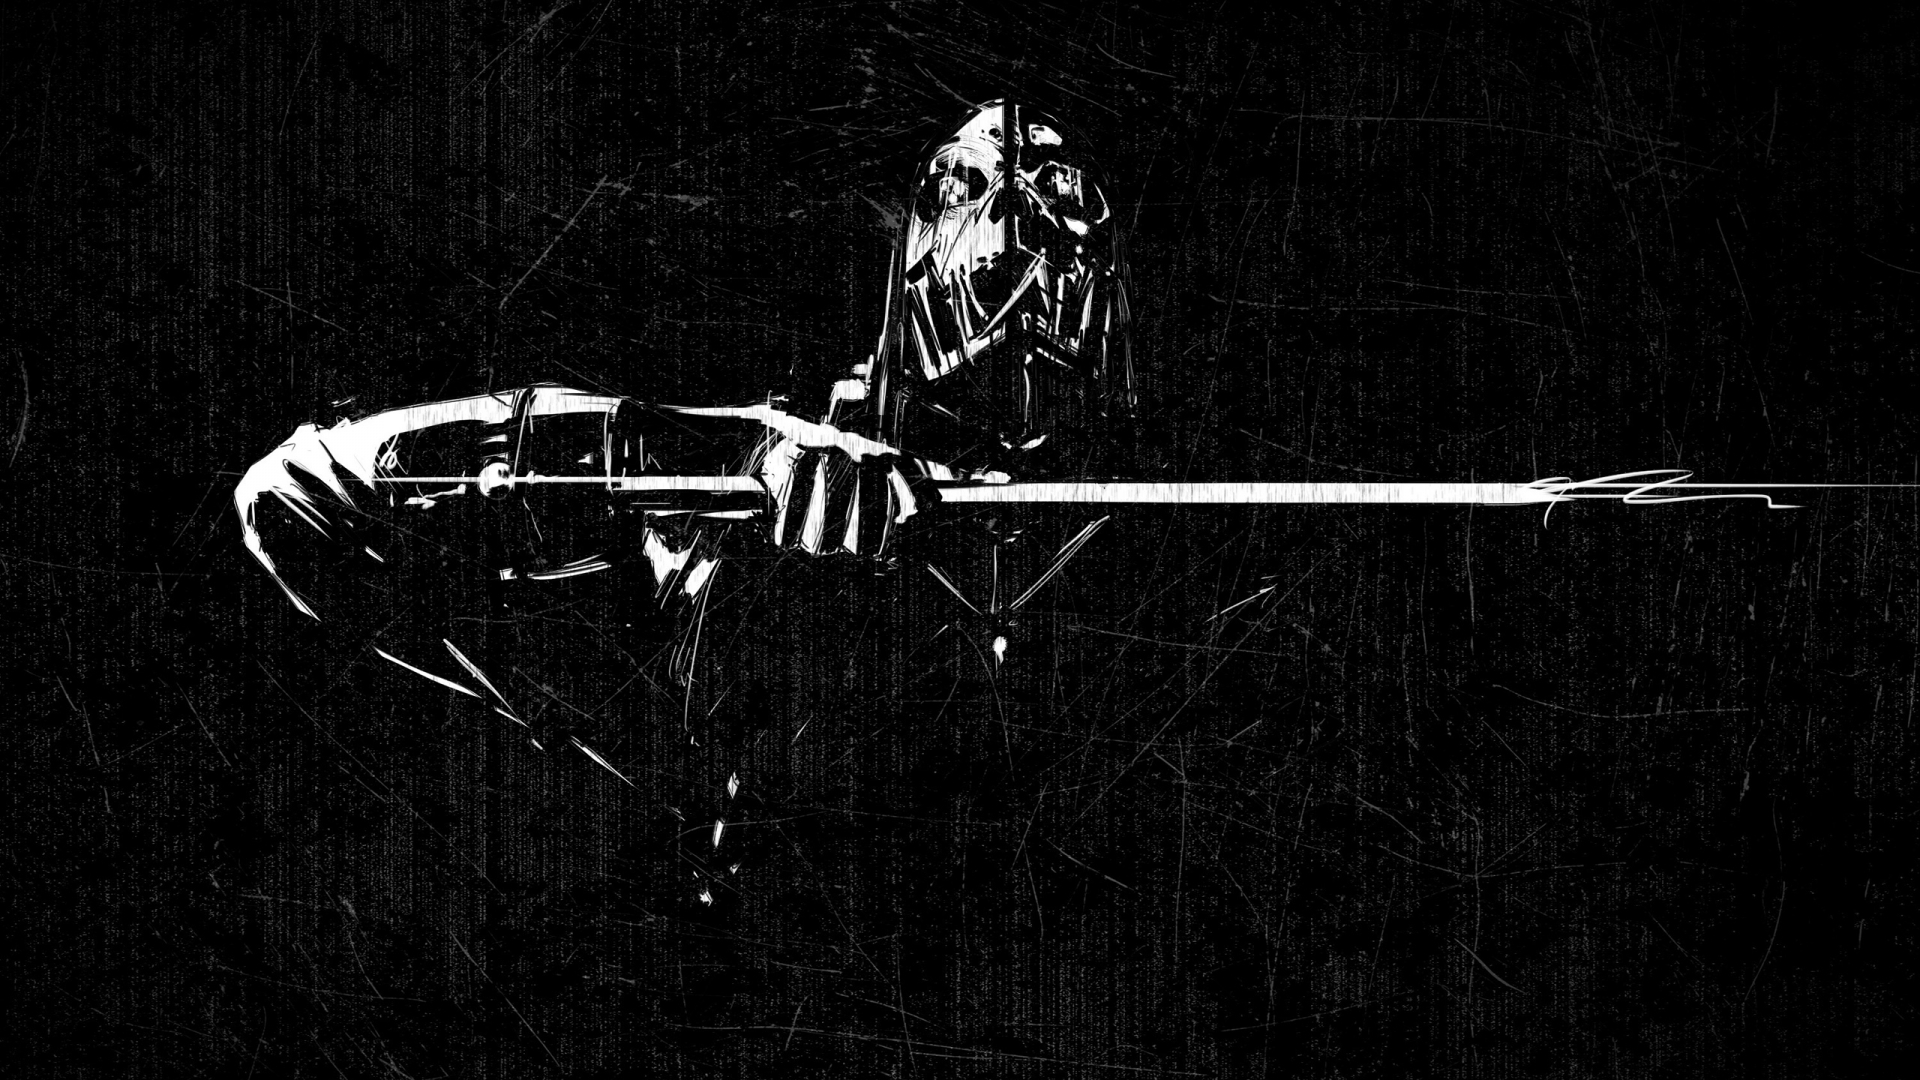 Dishonored Scraped Minimal for 1920 x 1080 HDTV 1080p resolution